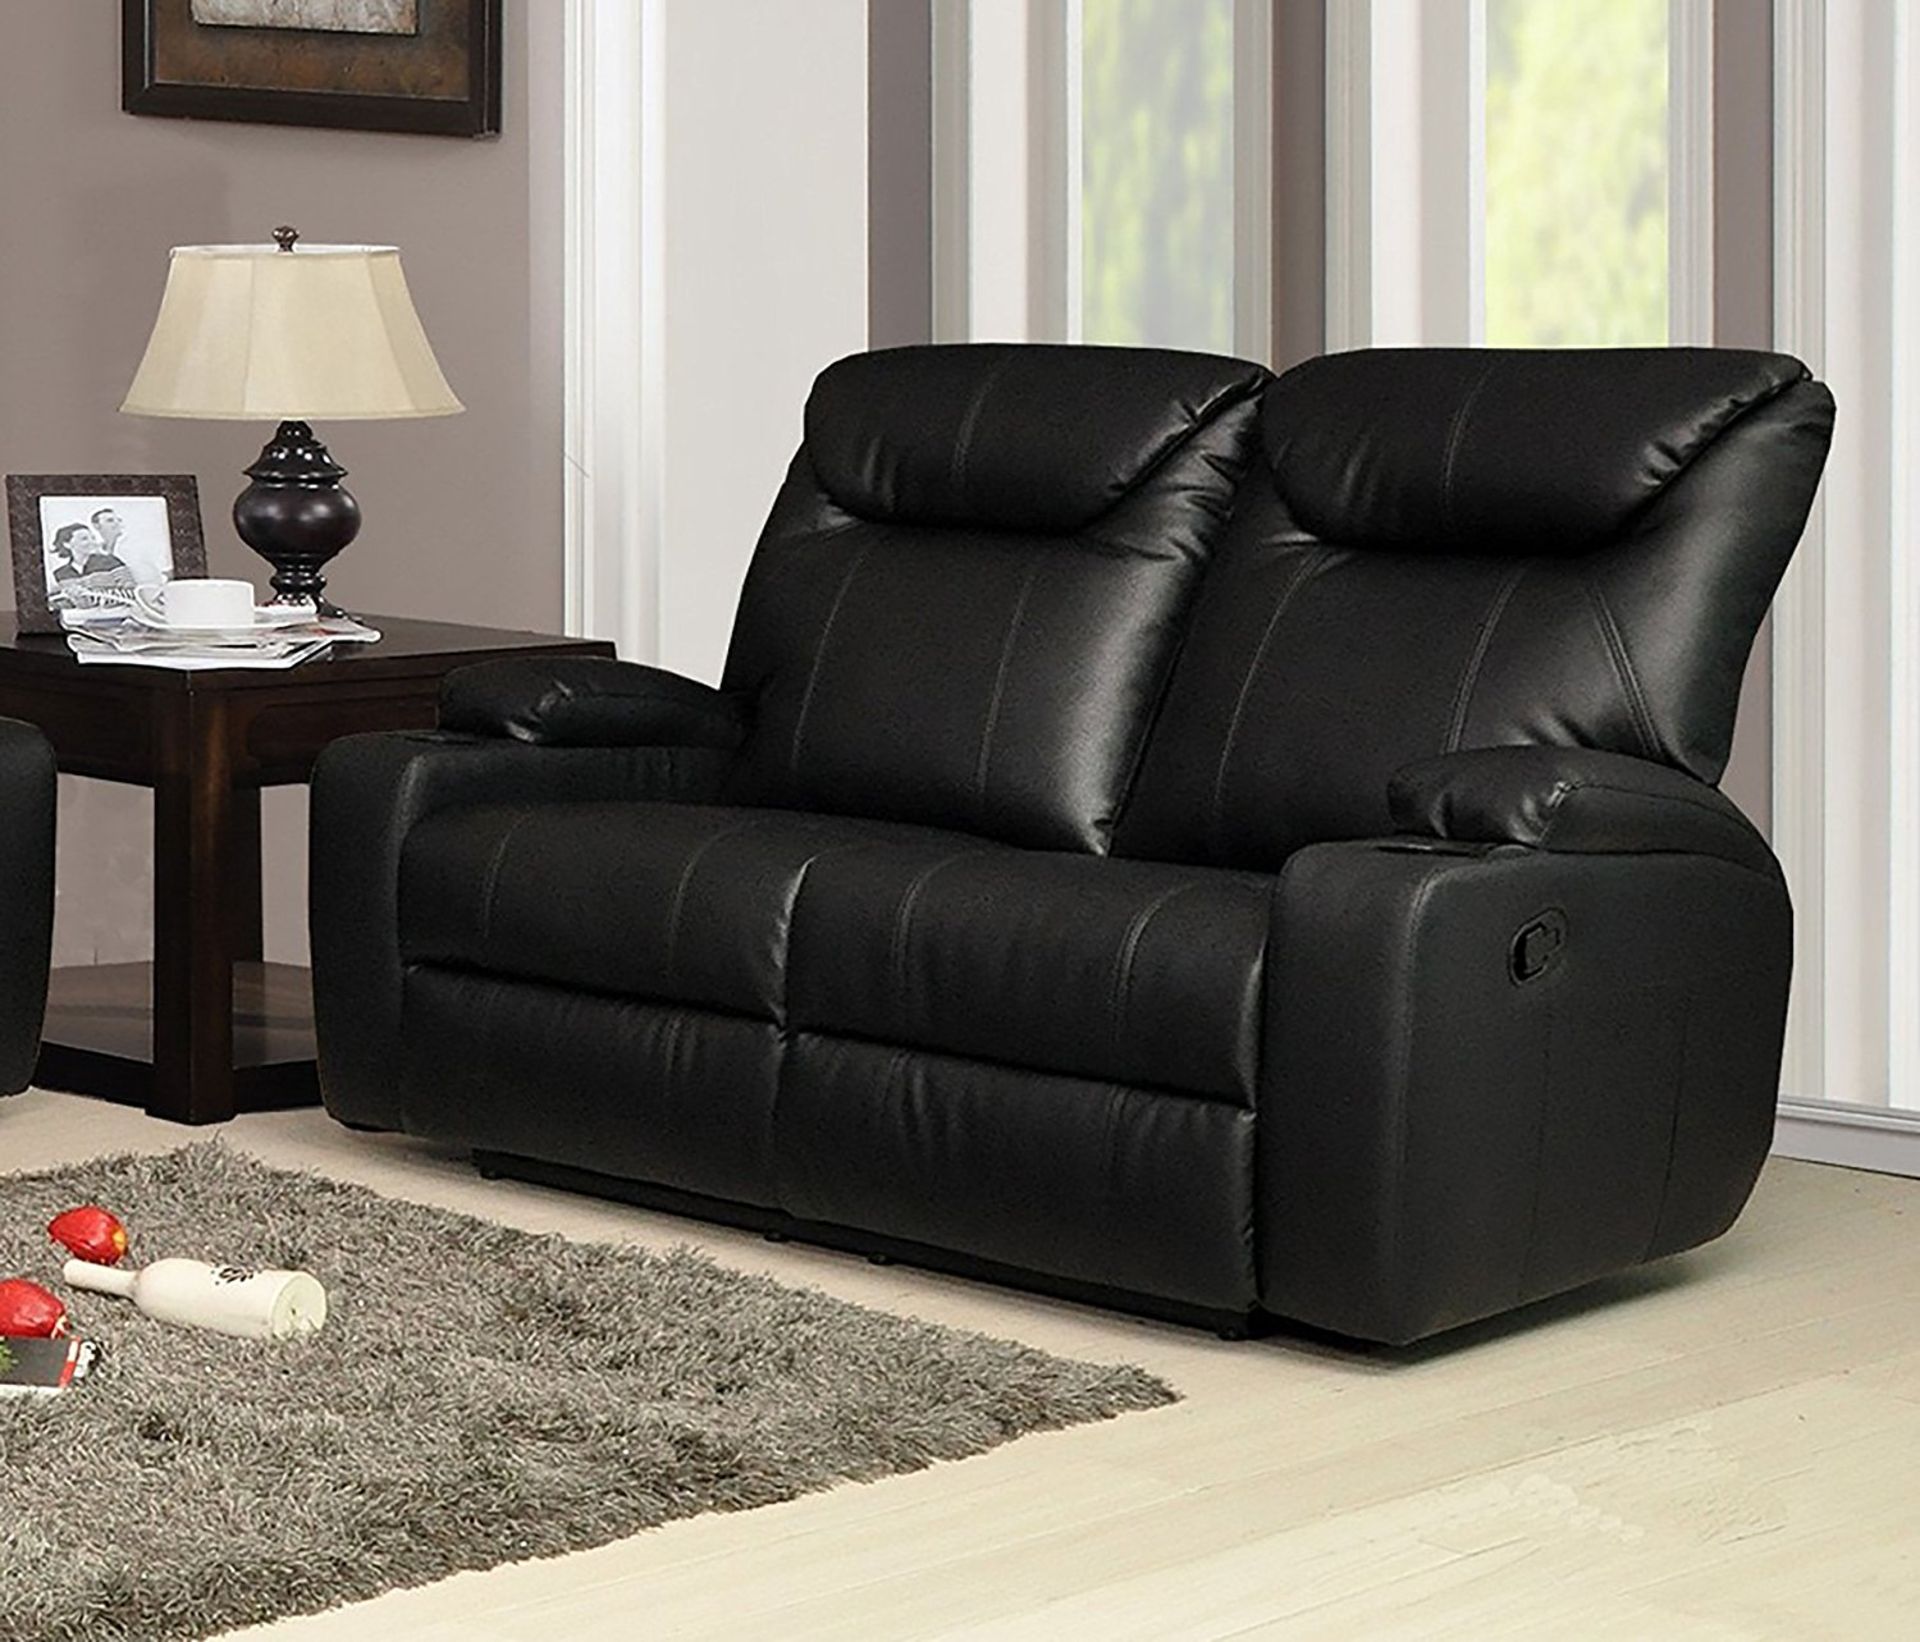 Brand New Boxed 3 Seater Plus 2 Seater Lazyboy Black Leather Manual Reclining Sofas - Image 2 of 3